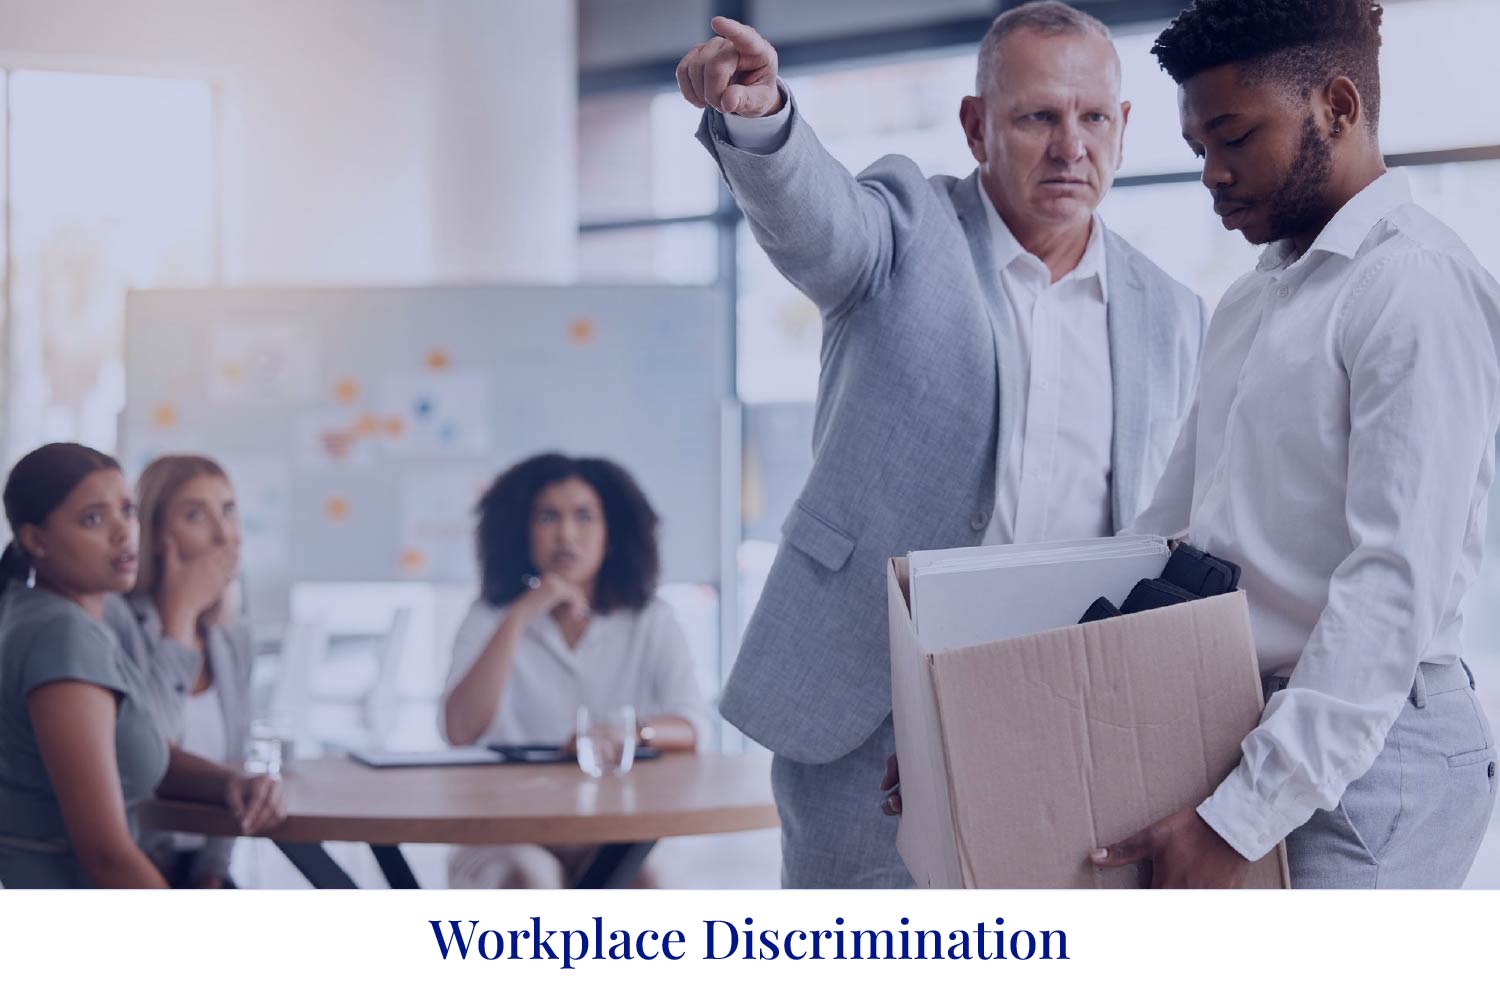 A person is being told to leave their job with a box in their hands, and other people are watching. It says 'Workplace Discrimination' above